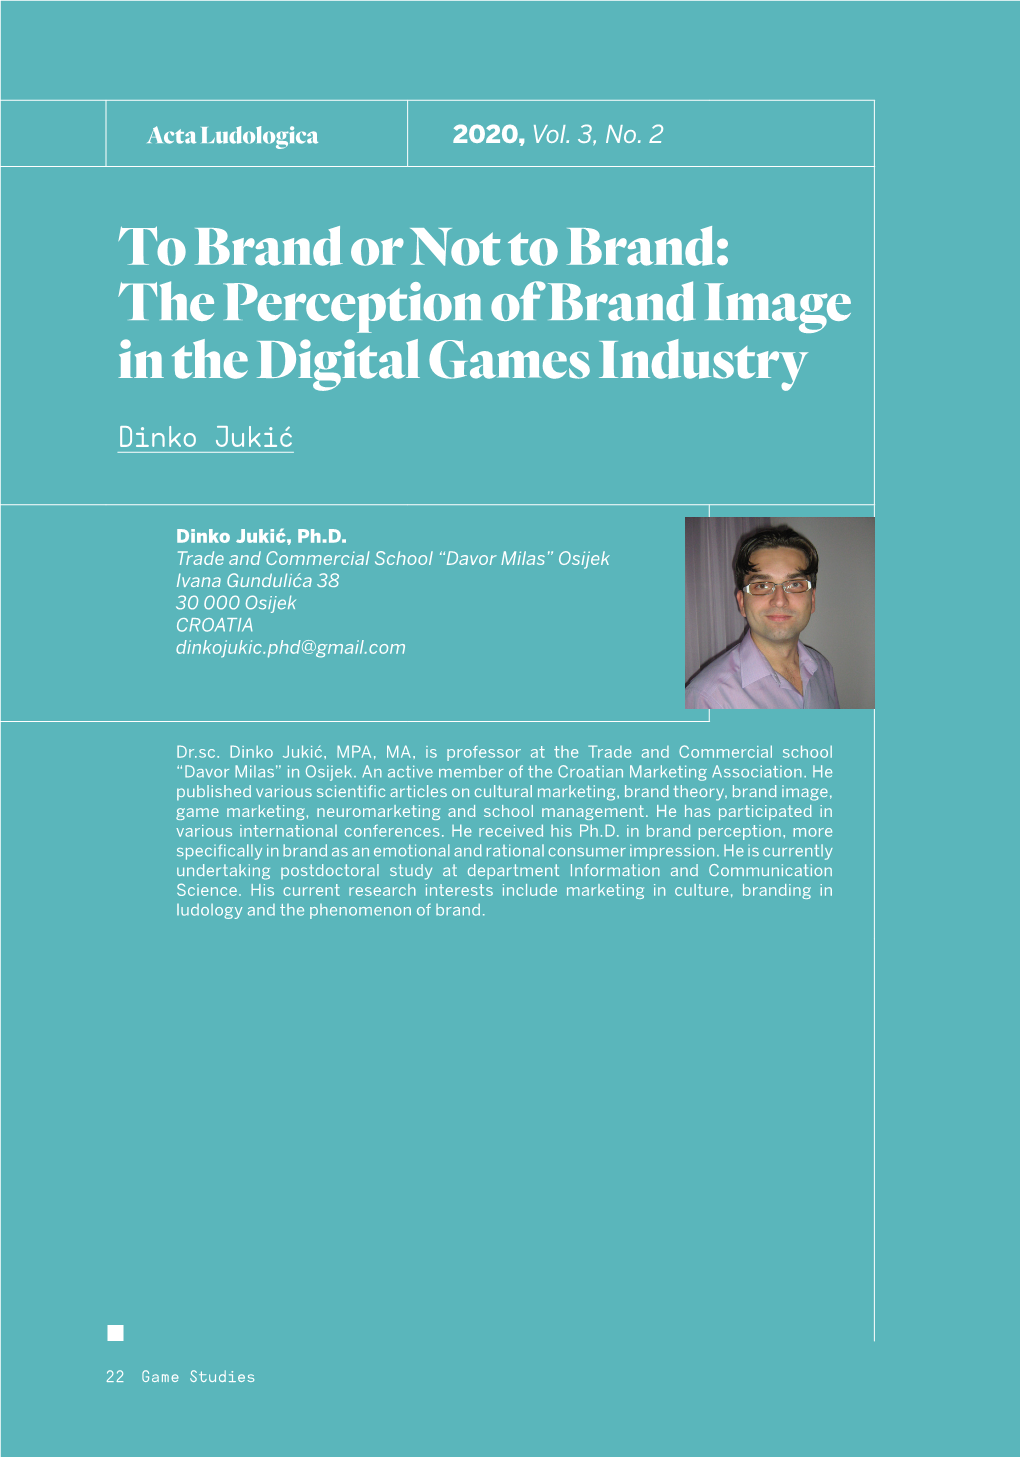 The Perception of Brand Image in the Digital Games Industry